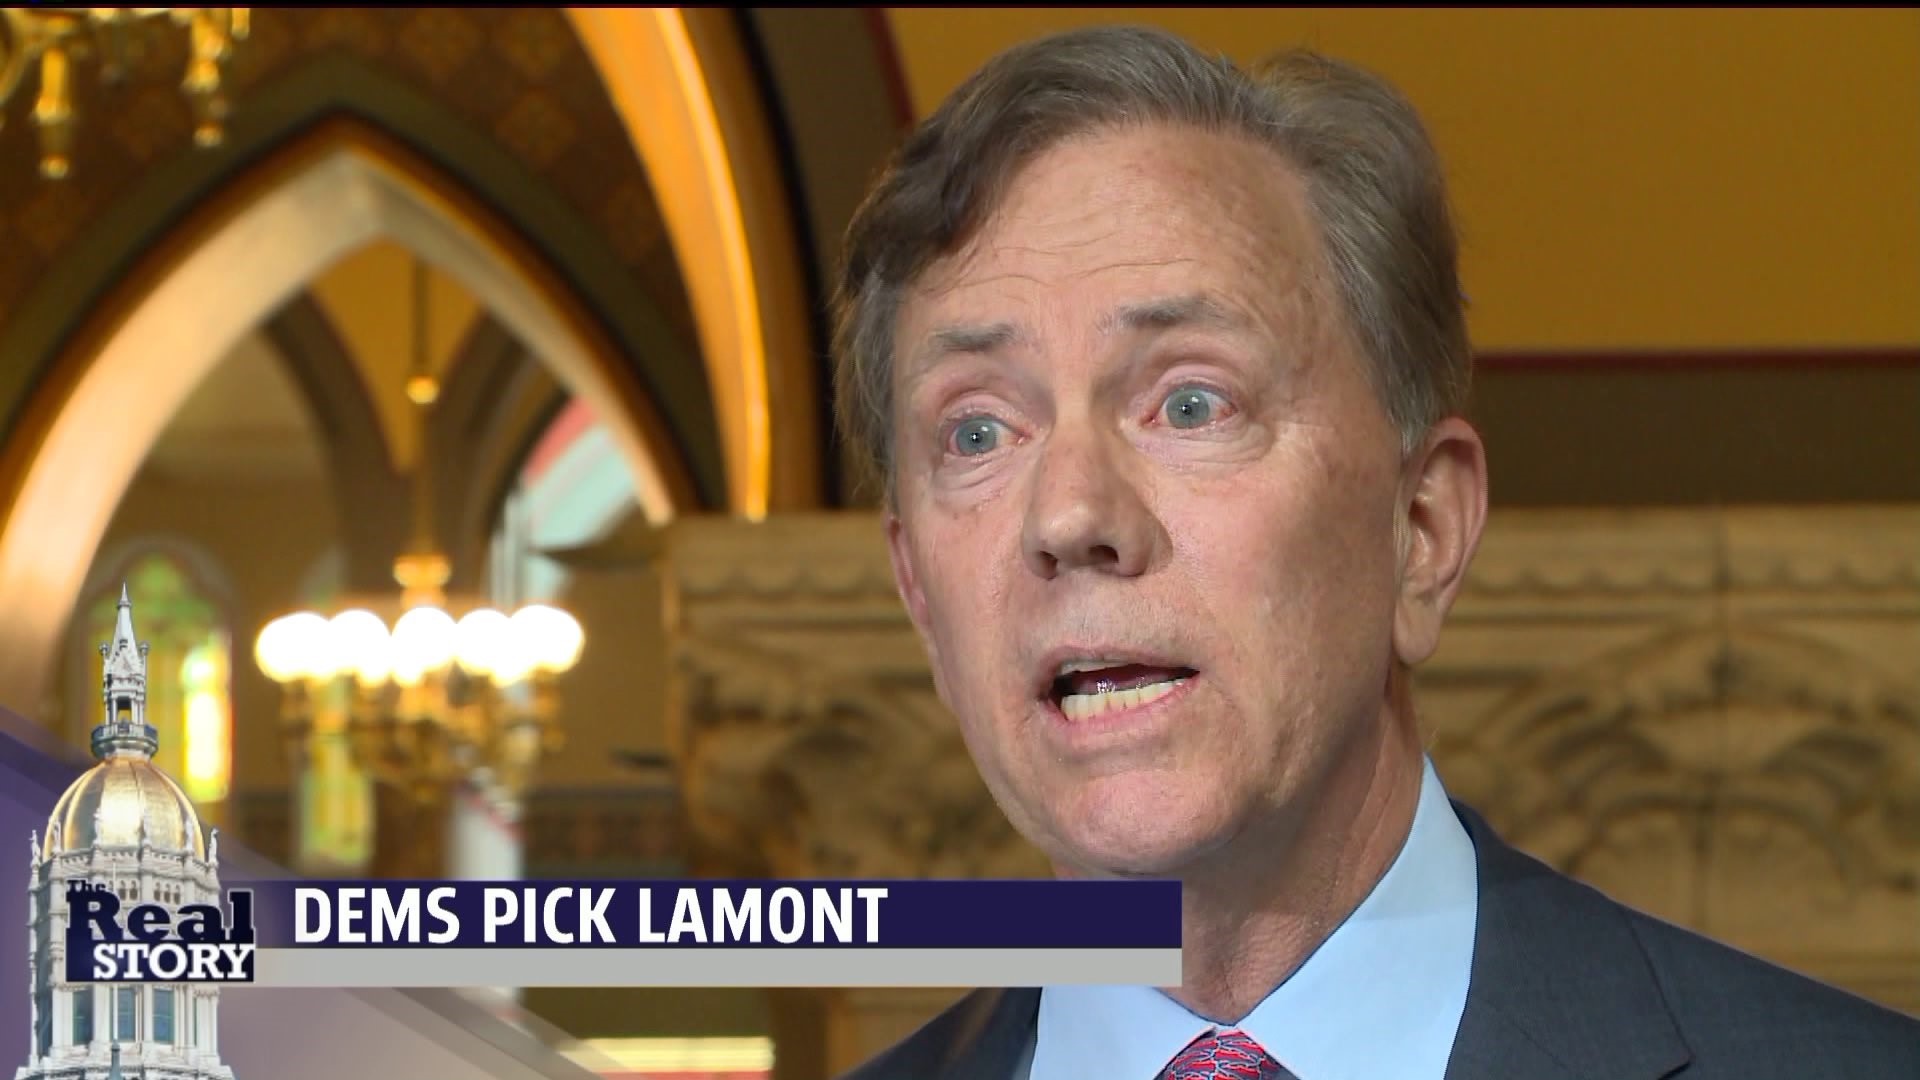 The Real Story - Dems pick Ned Lamont